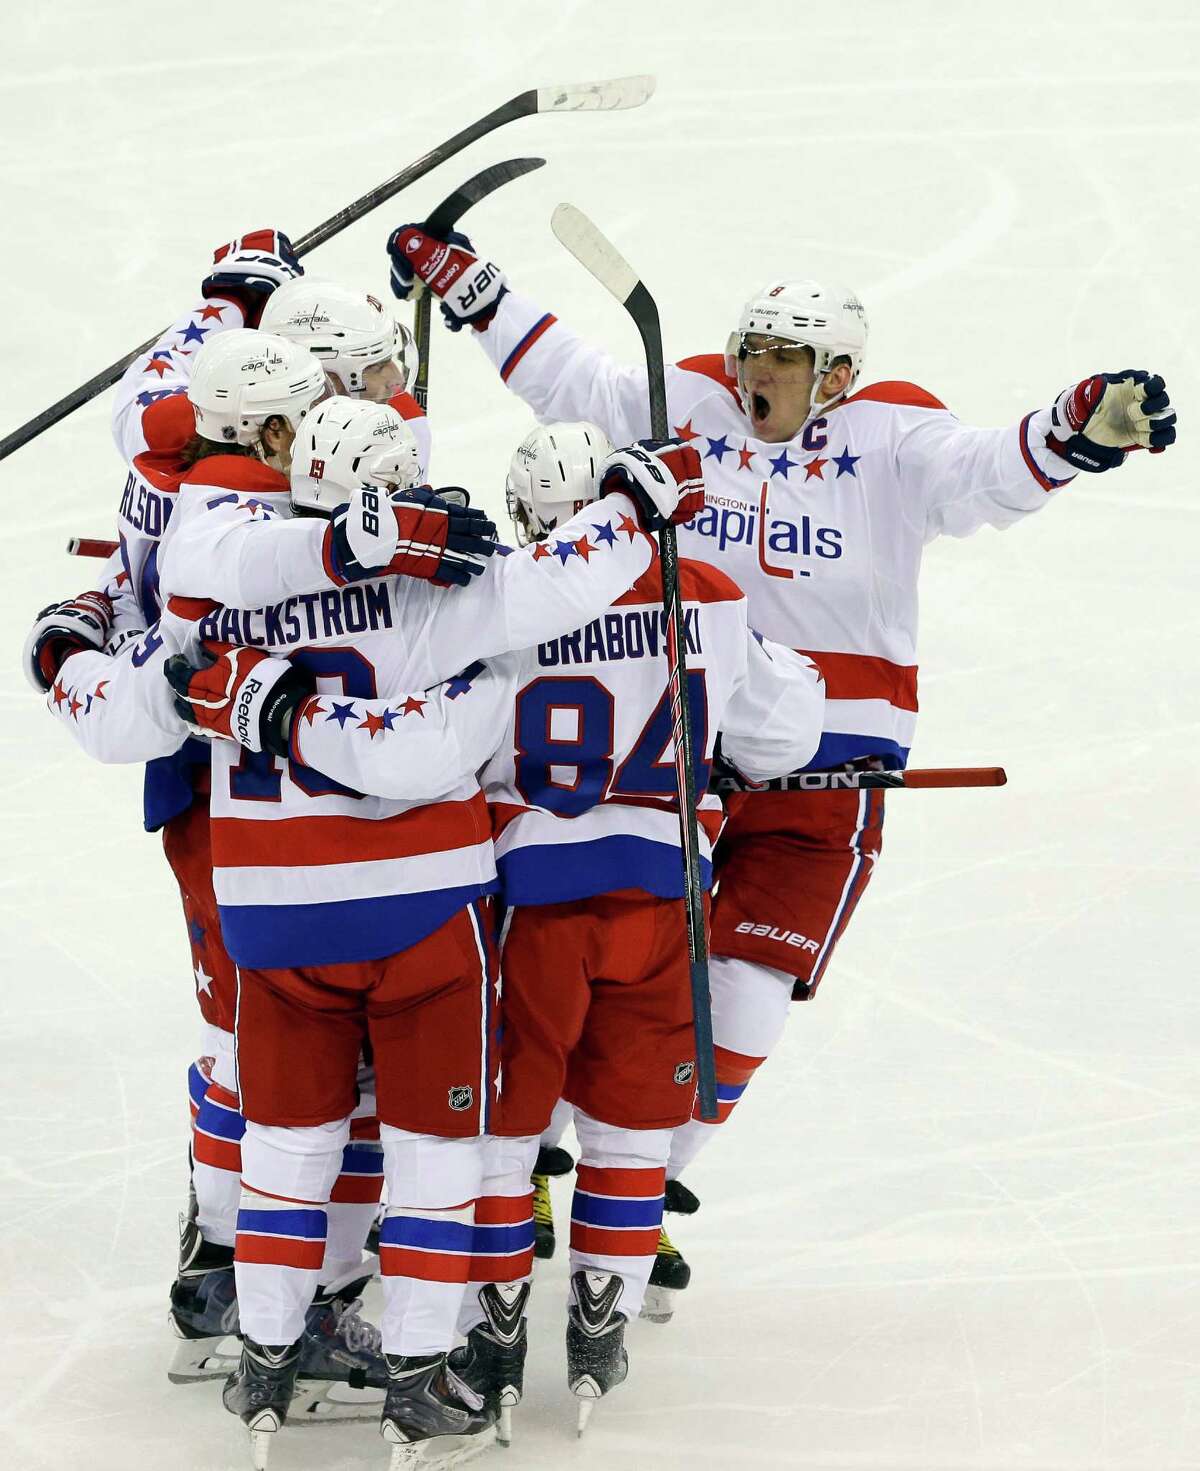 Washington's Alex Ovechkin, right, has a lot to celebrate after he scored his 400th career goal and the Capitals defeated Carolina 4-2 on Friday night.